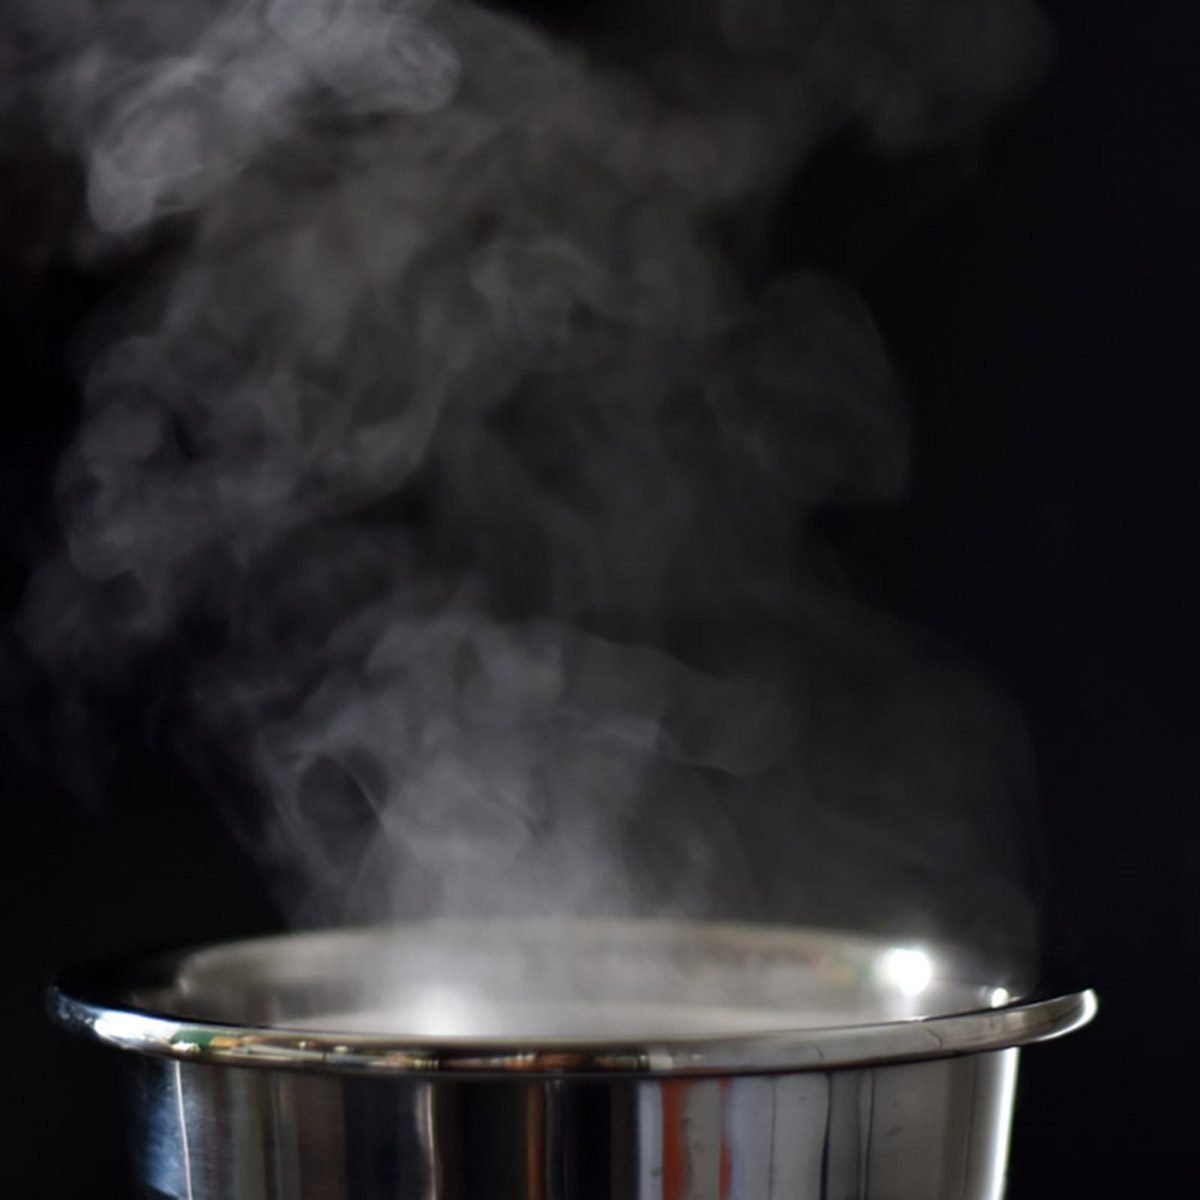 Smoke from the cooking pot